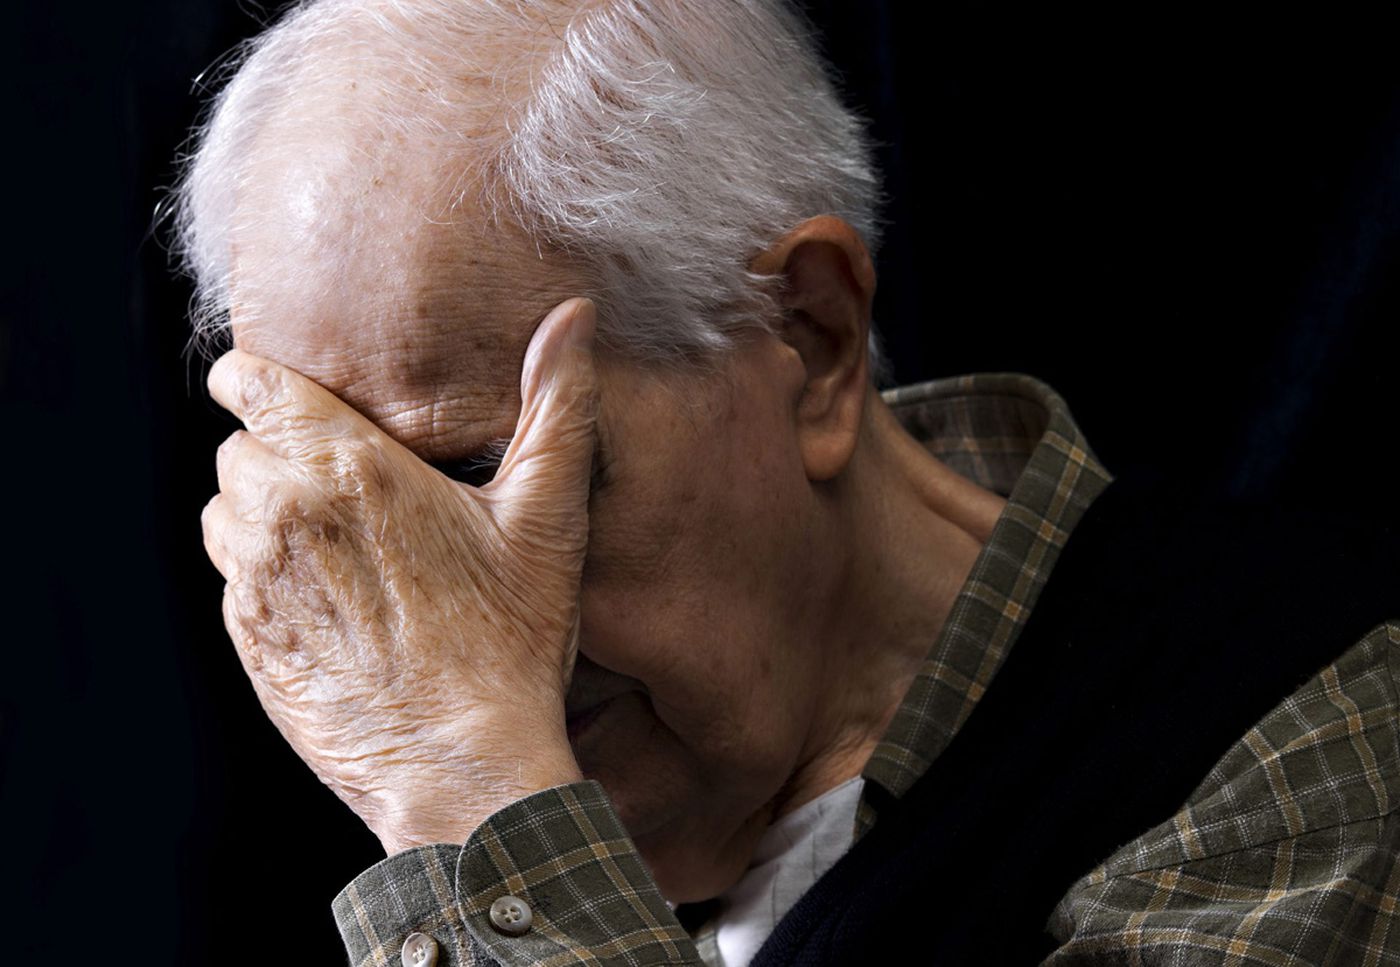 Depression may be linked to Parkinson